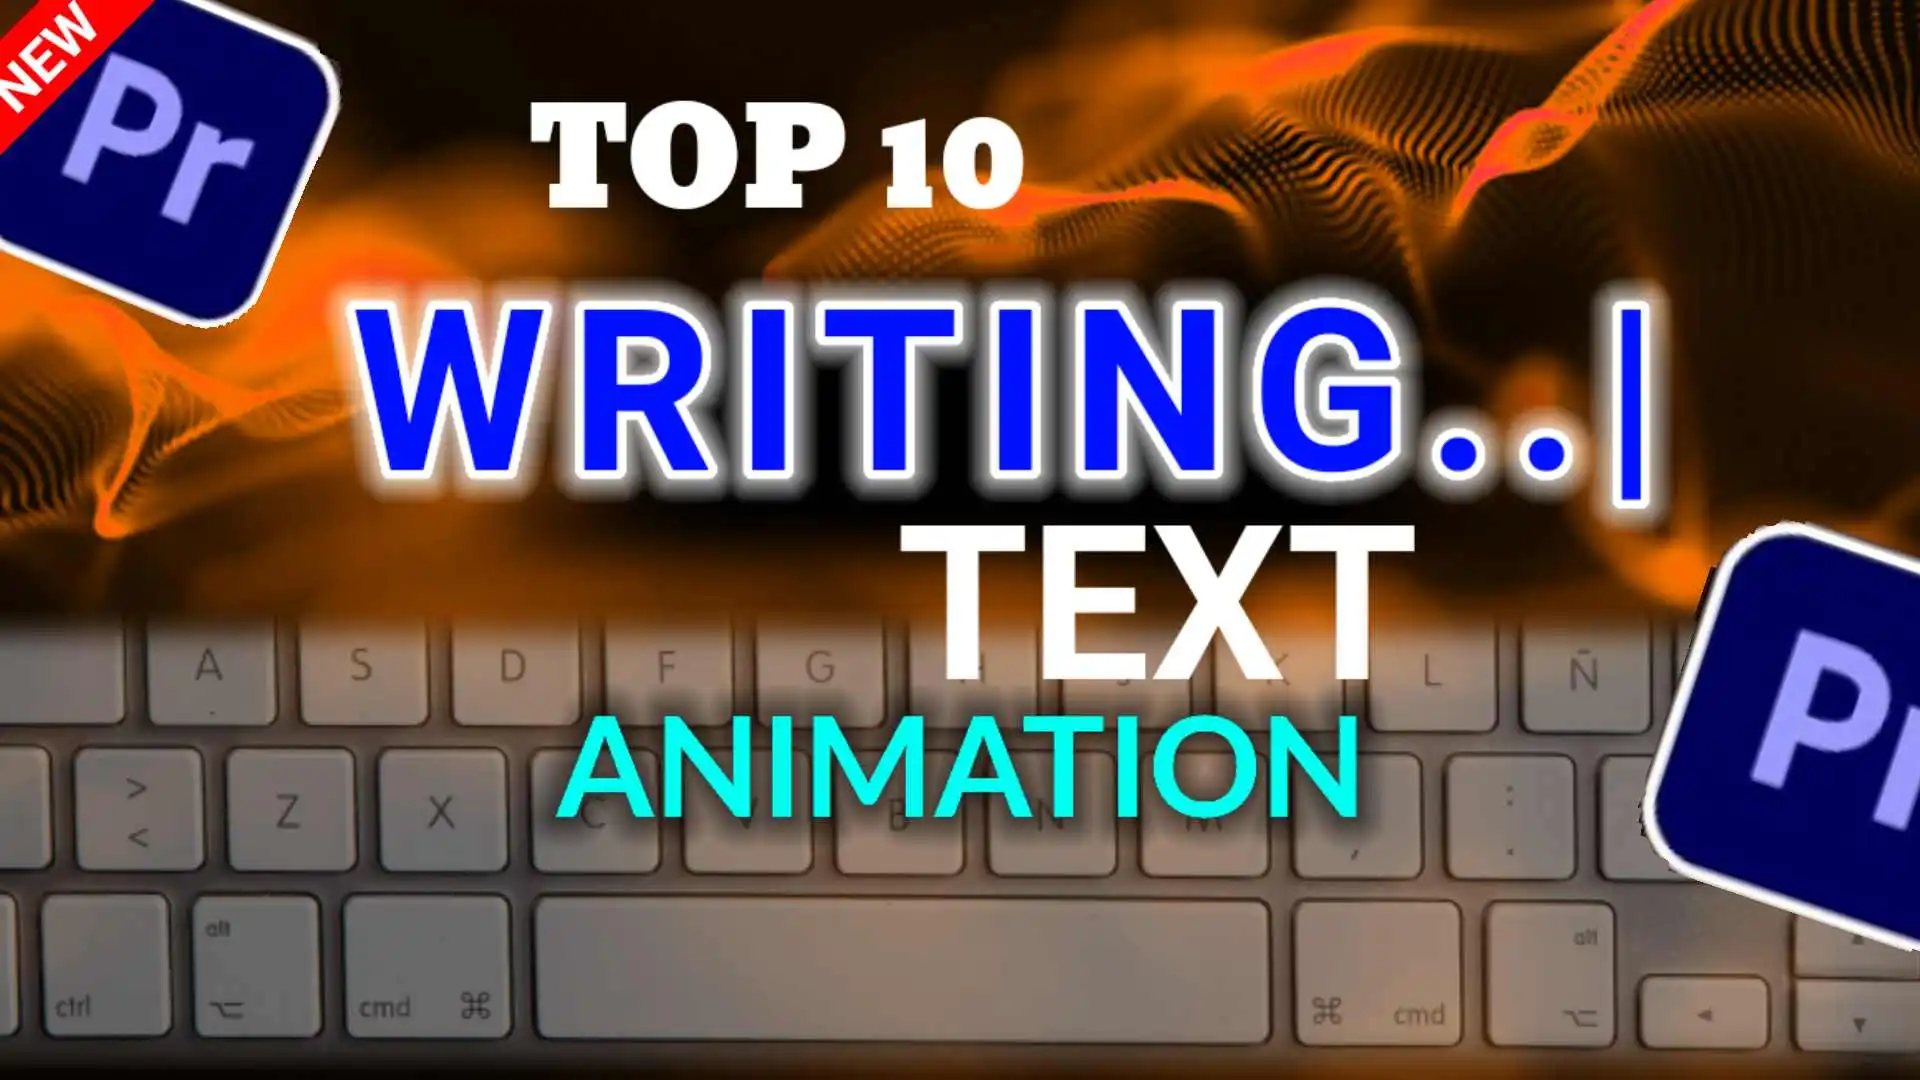 Writing Text Animation Premiere Pro Presets Free Download